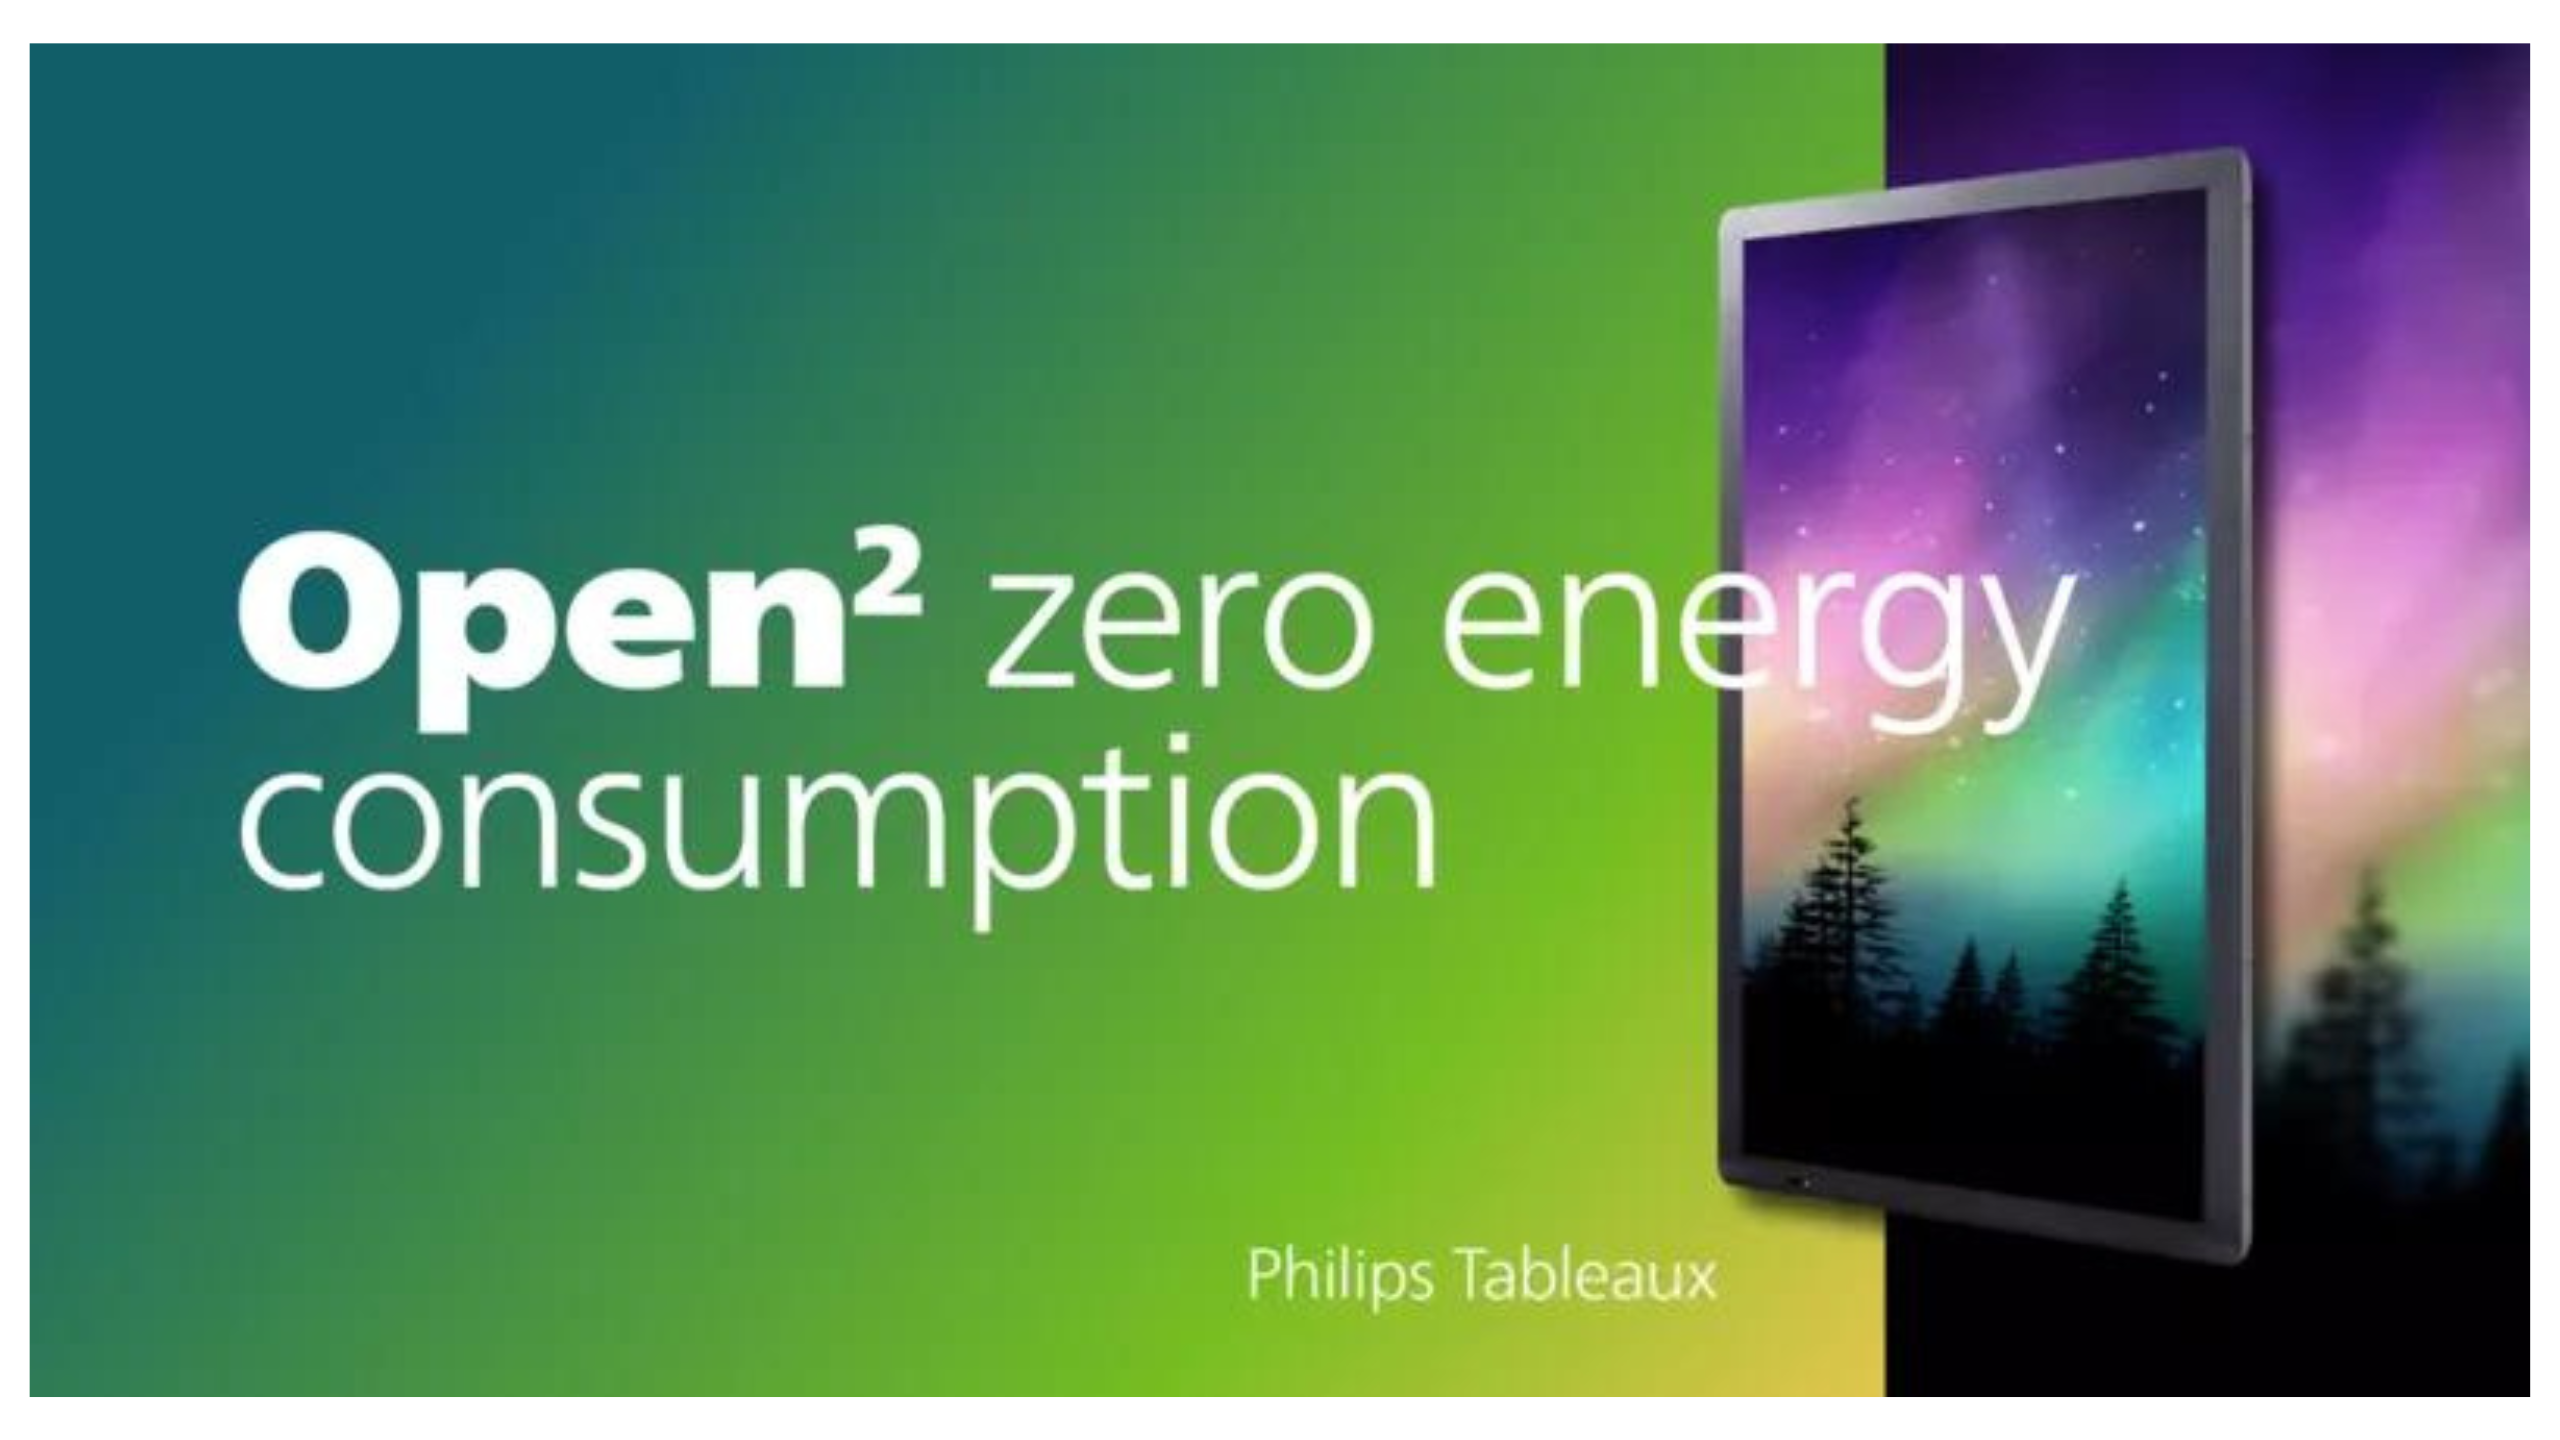 Philips Tableaux ePaper Displays: Power-Free Digital Signage for Versatility and Sustainability